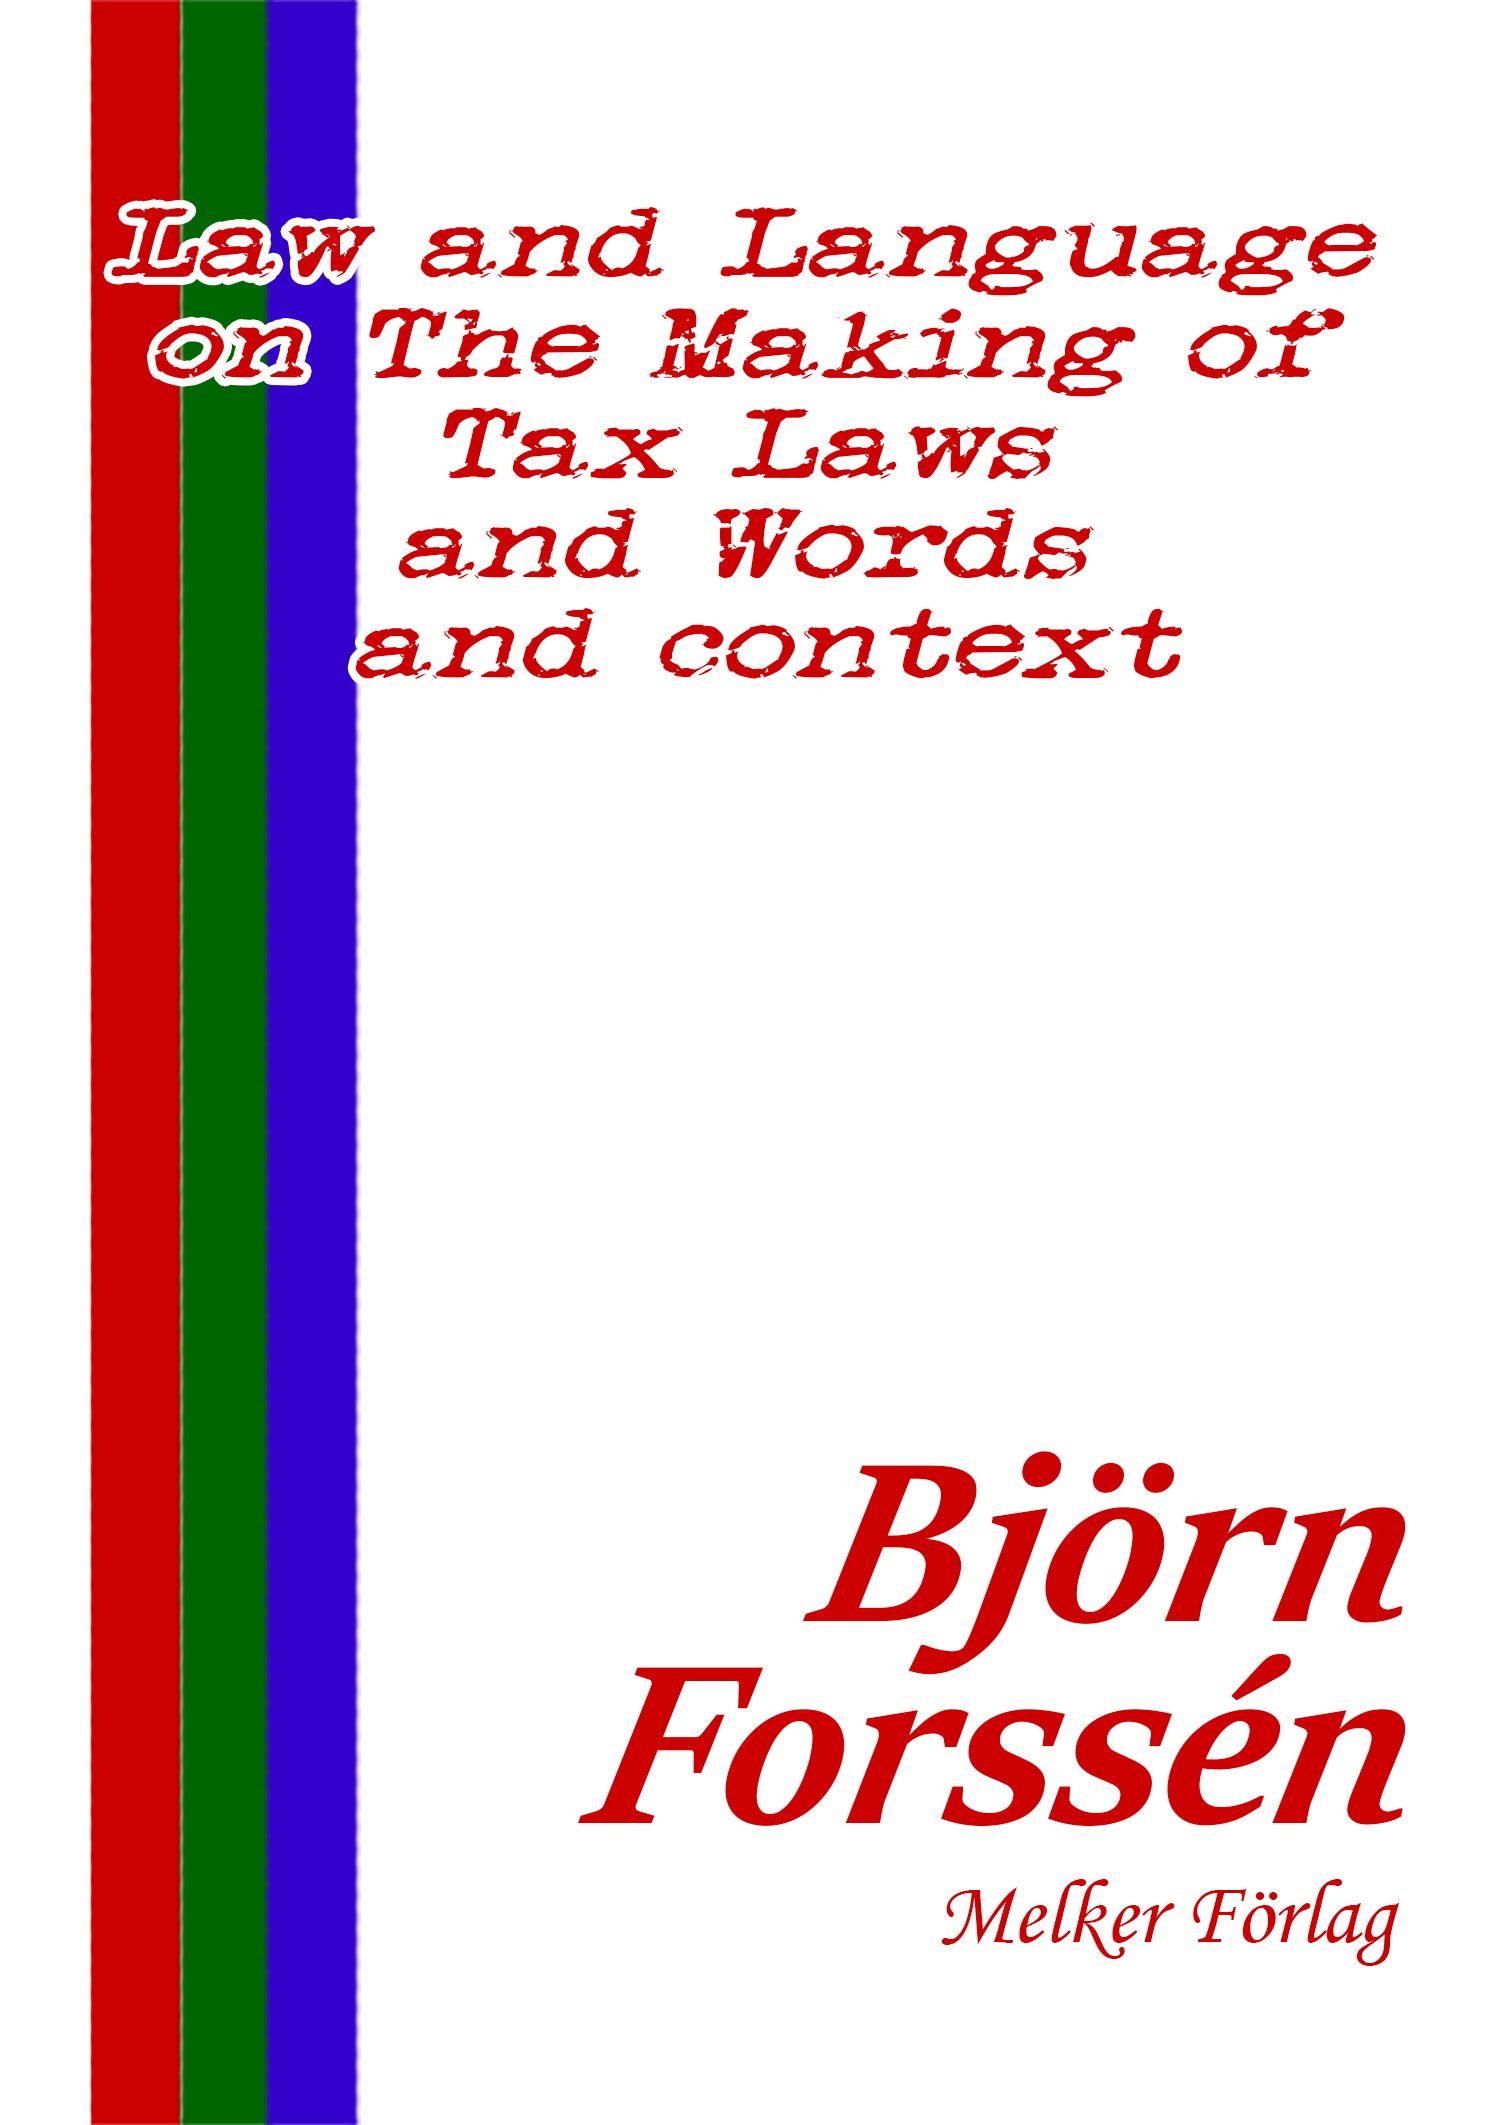 Law and Language on The Making of Tax Laws and Words and context, eBook by Björn Forssén